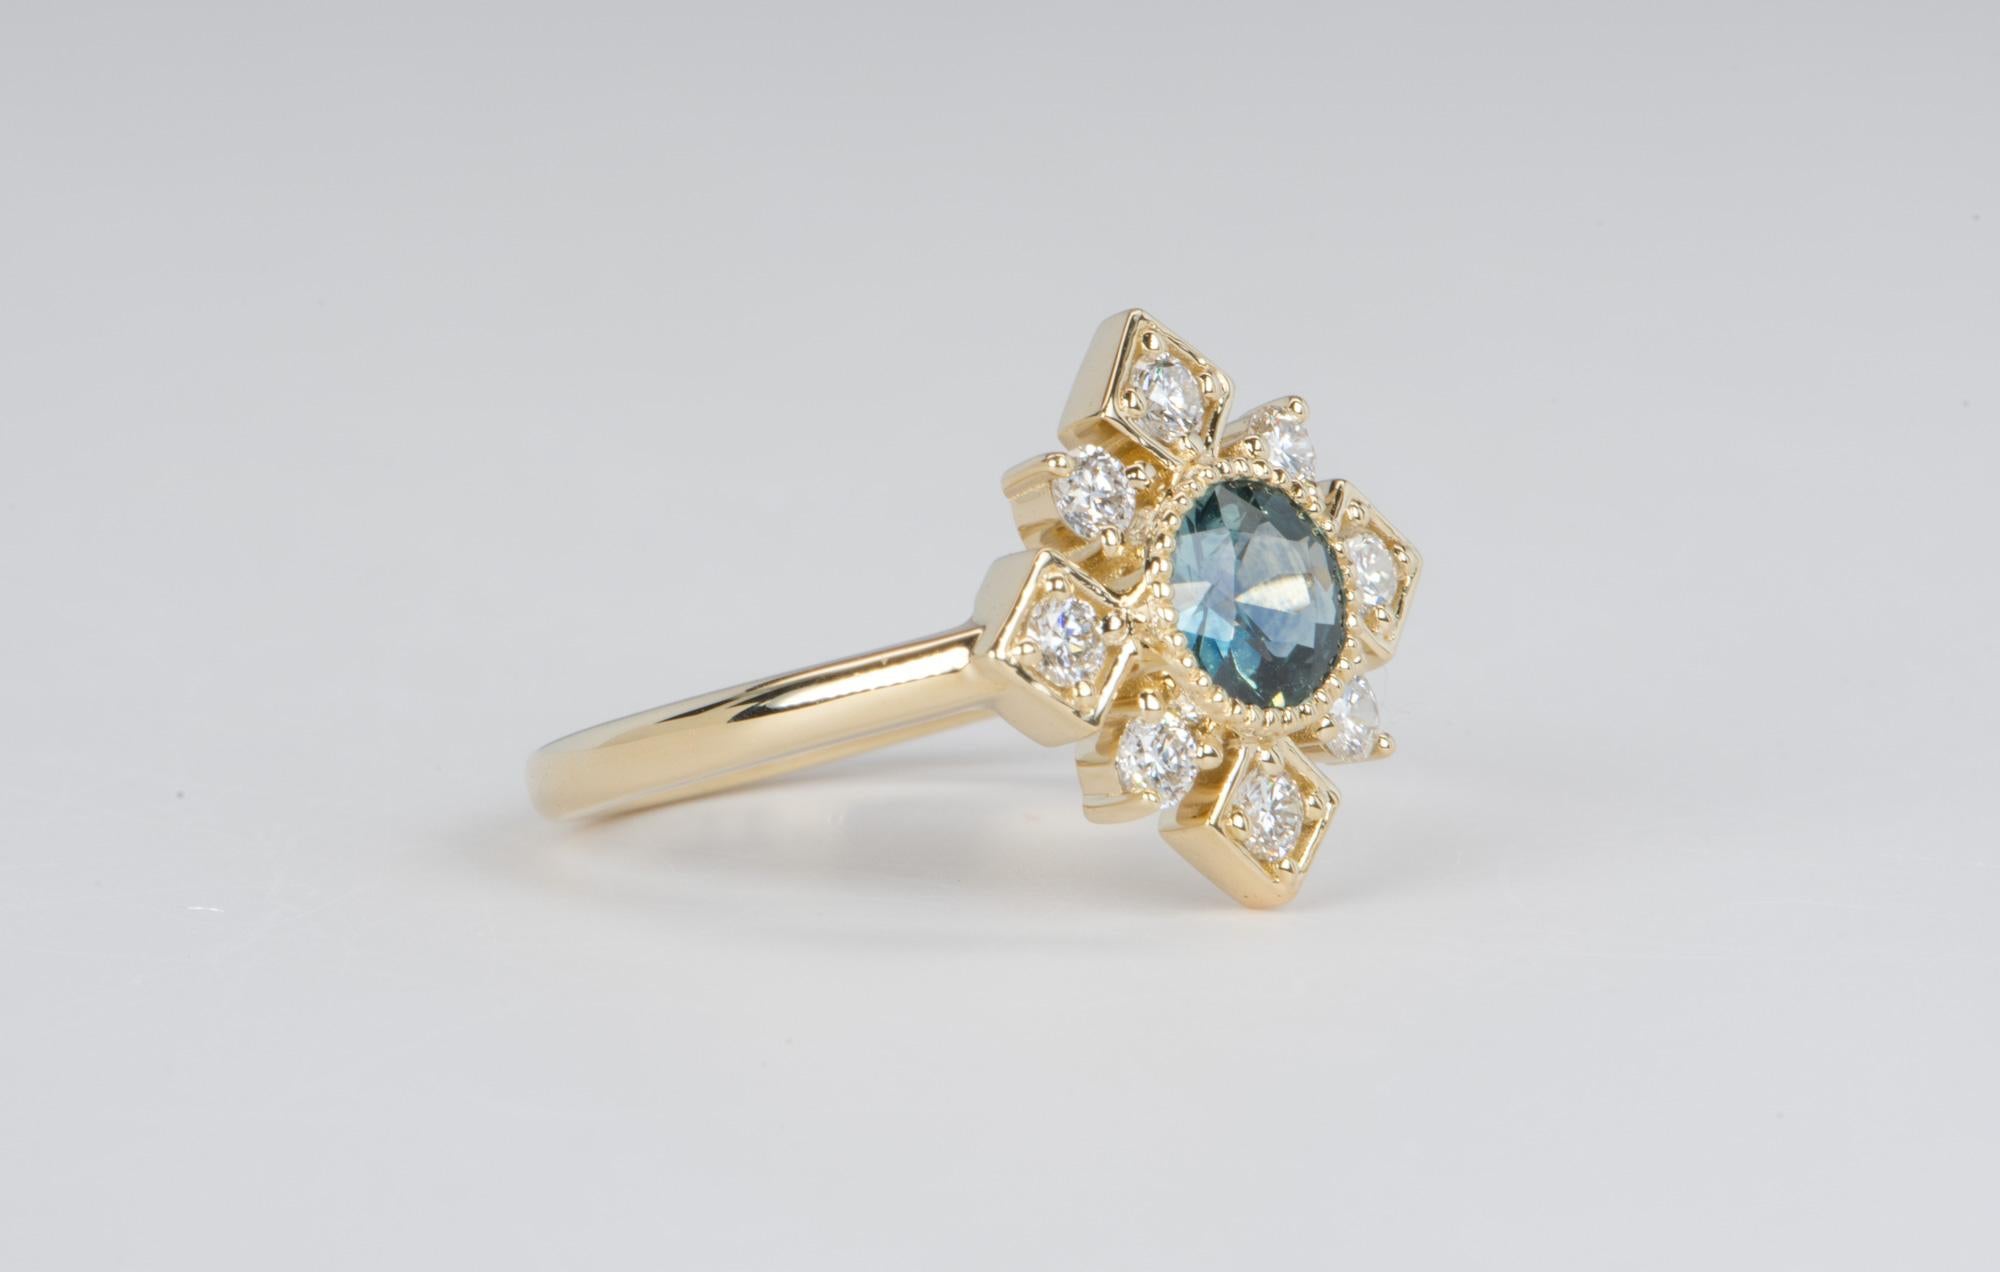 ♥  A solid 14k yellow gold engagement ring featuring a beautiful Montana sapphire in the center, flanked by a brilliant diamond halo with the diamonds set in alternating round and square design
♥  The overall setting measures 14.3mm in width, 14.2mm